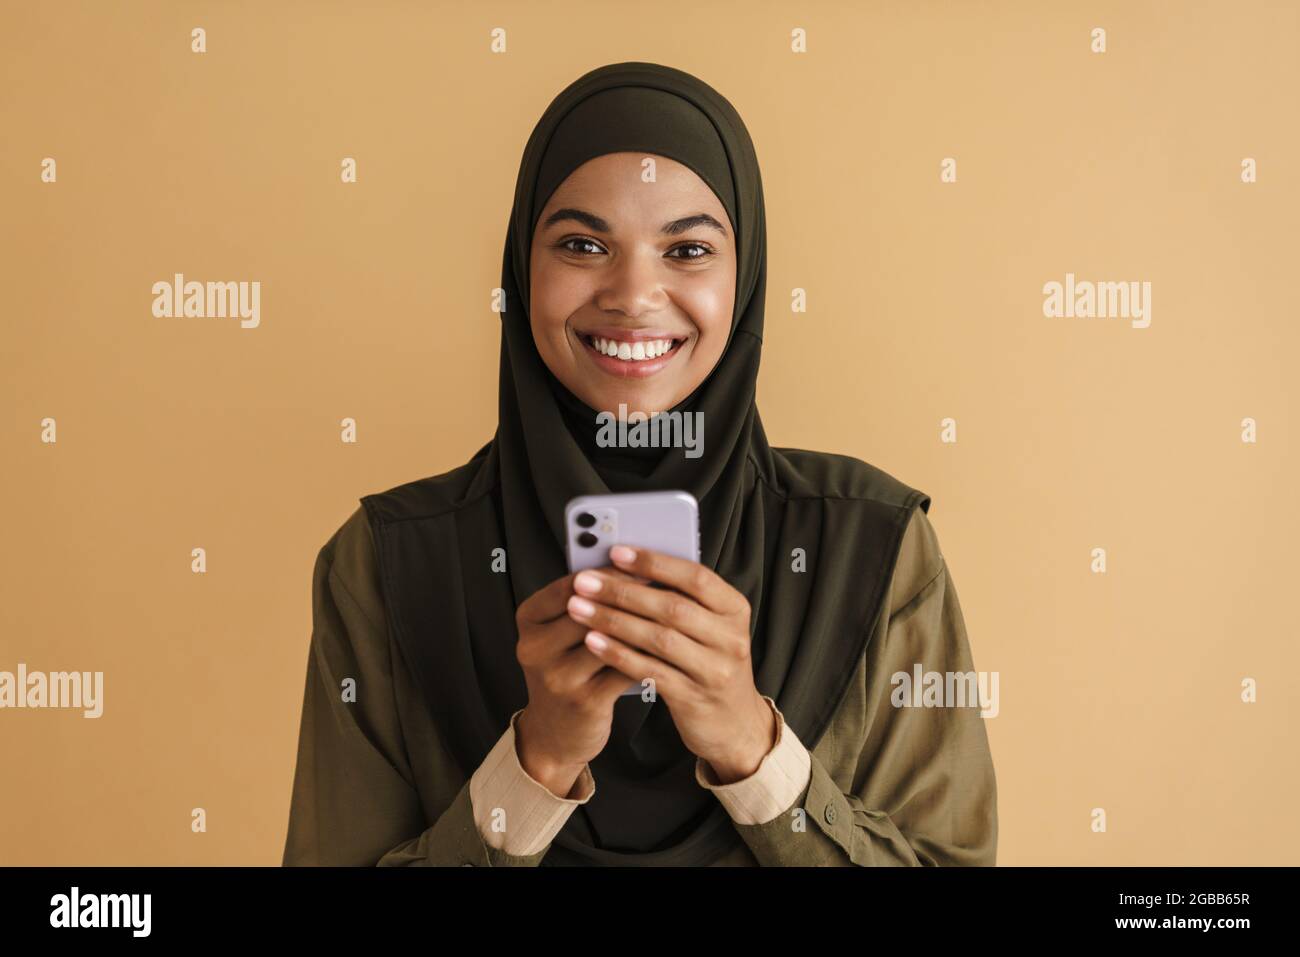 Black muslim woman in hijab smiling and using mobile phone isolated over beige background Stock Photo